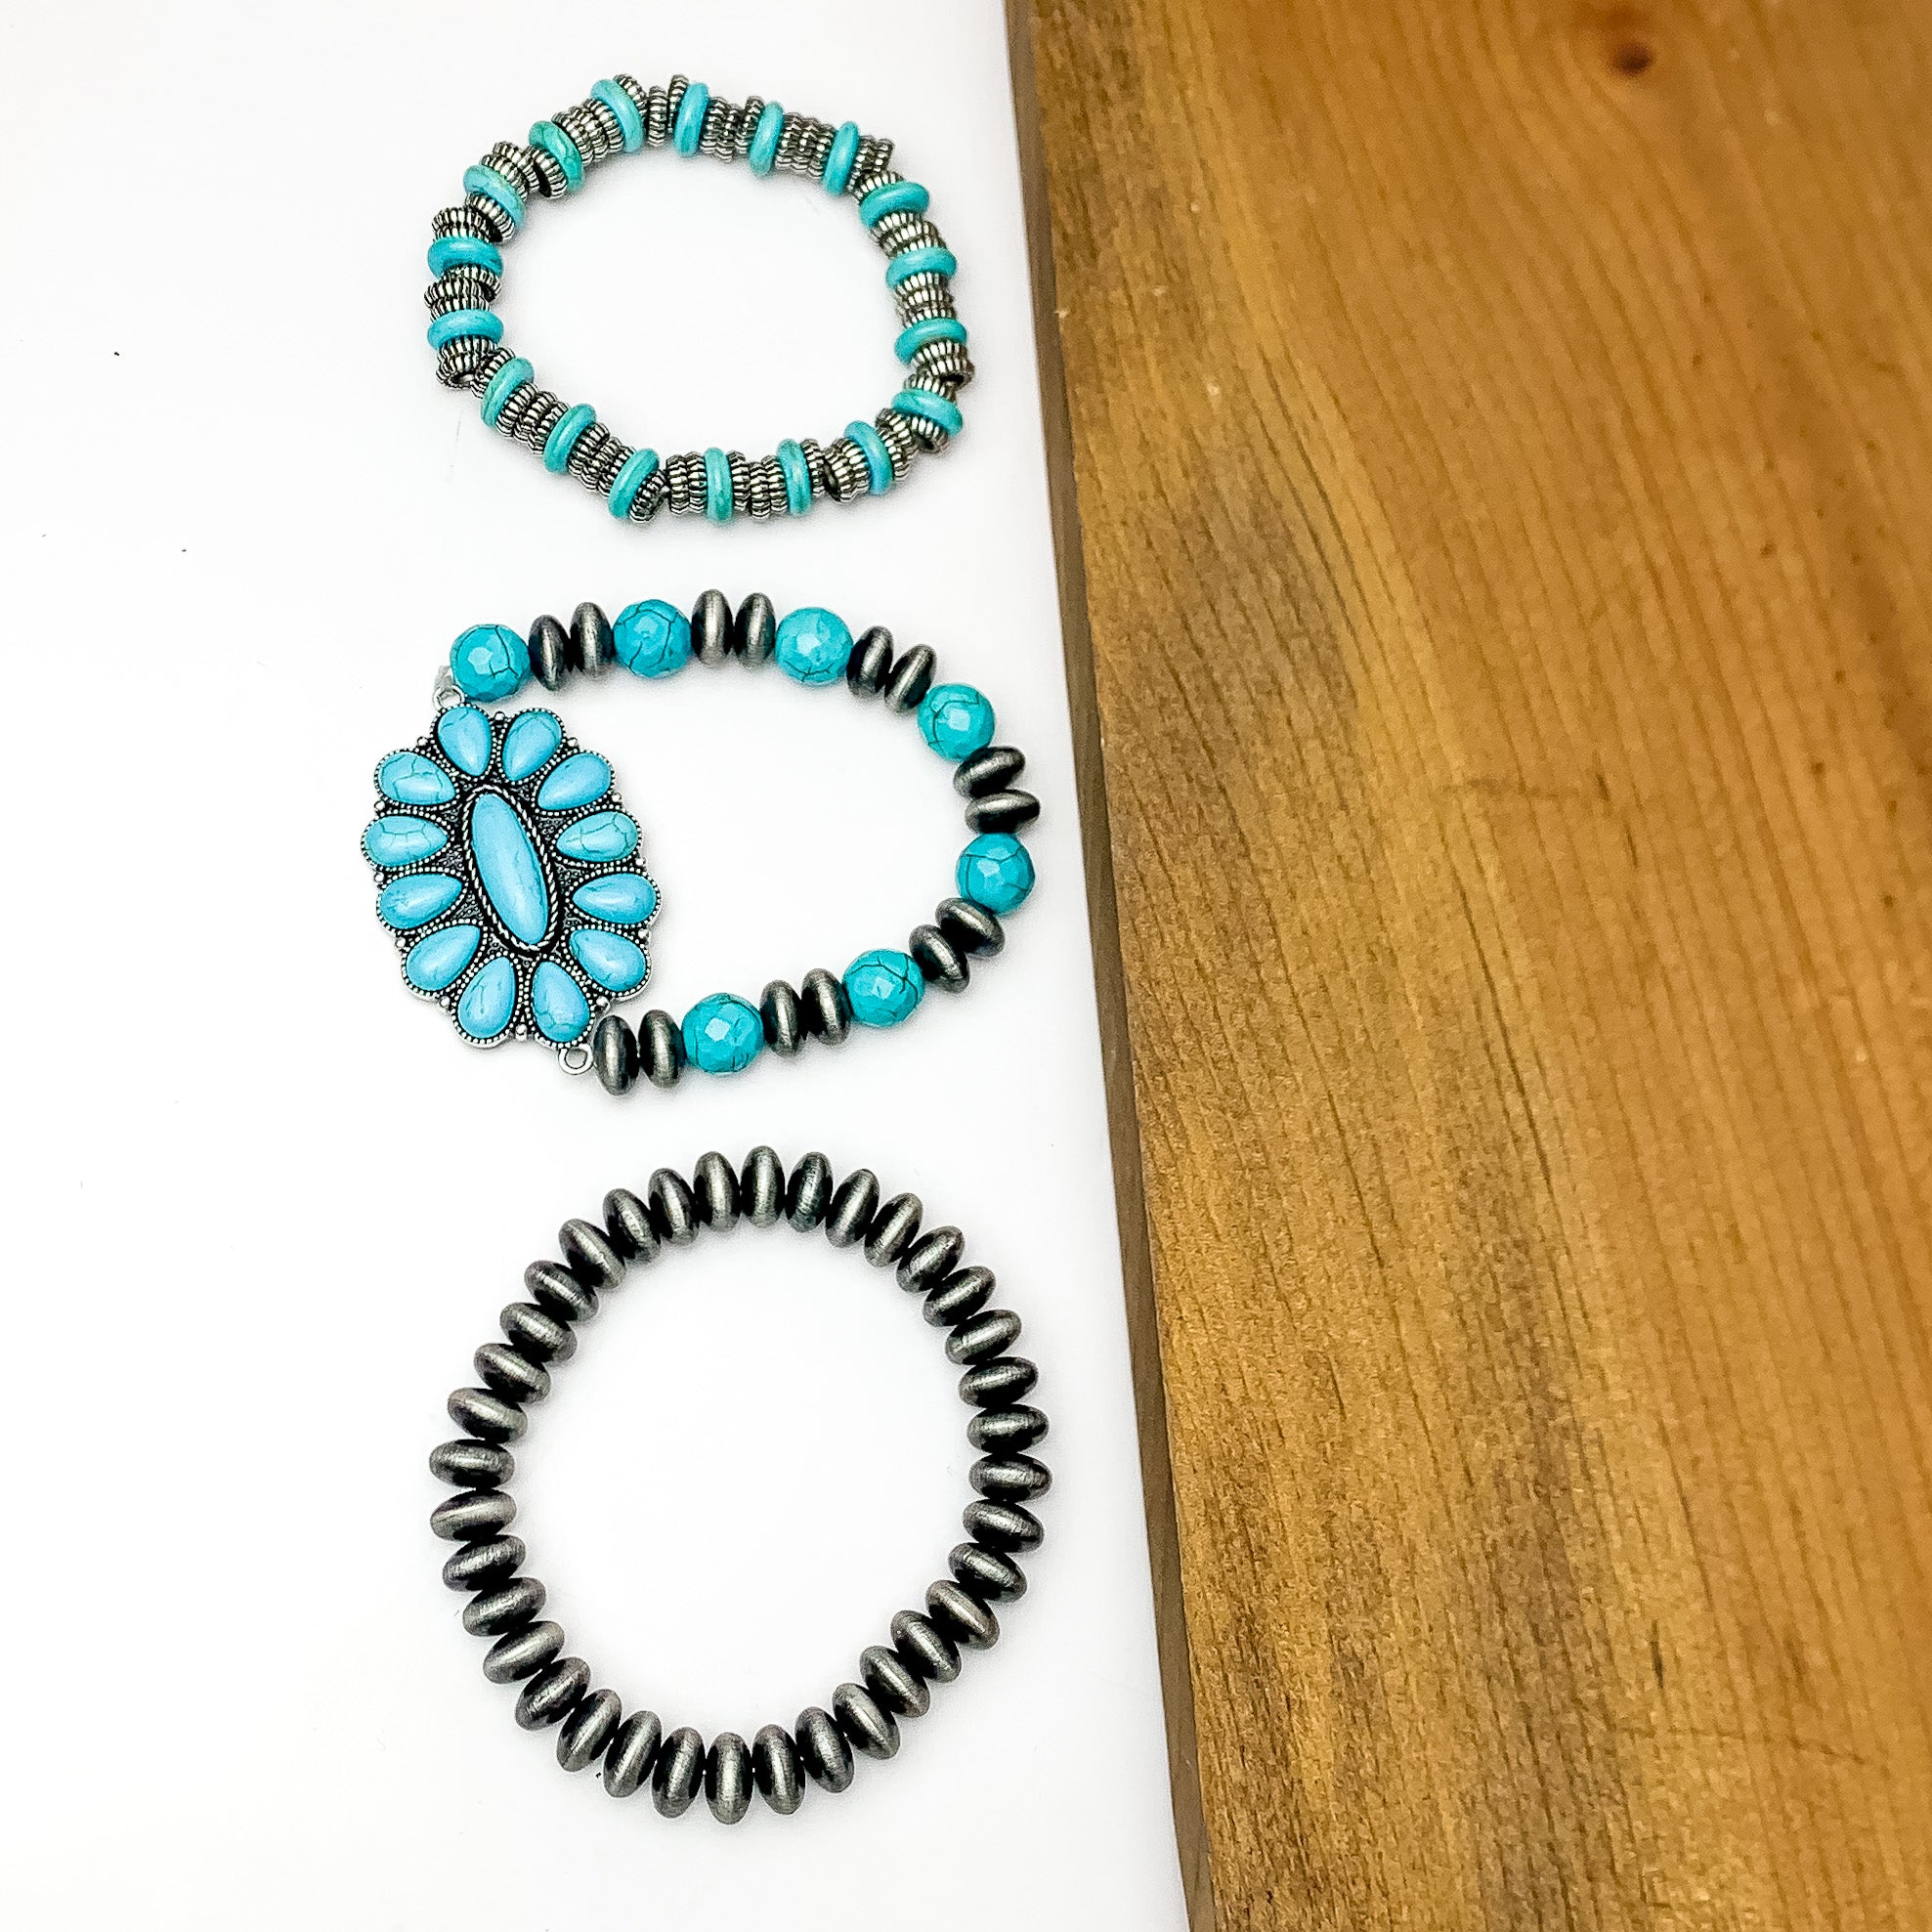 Set of Three | Silver Tone Bracelets With Turquoise Stones. Pictured on a white background with wood on the right side.